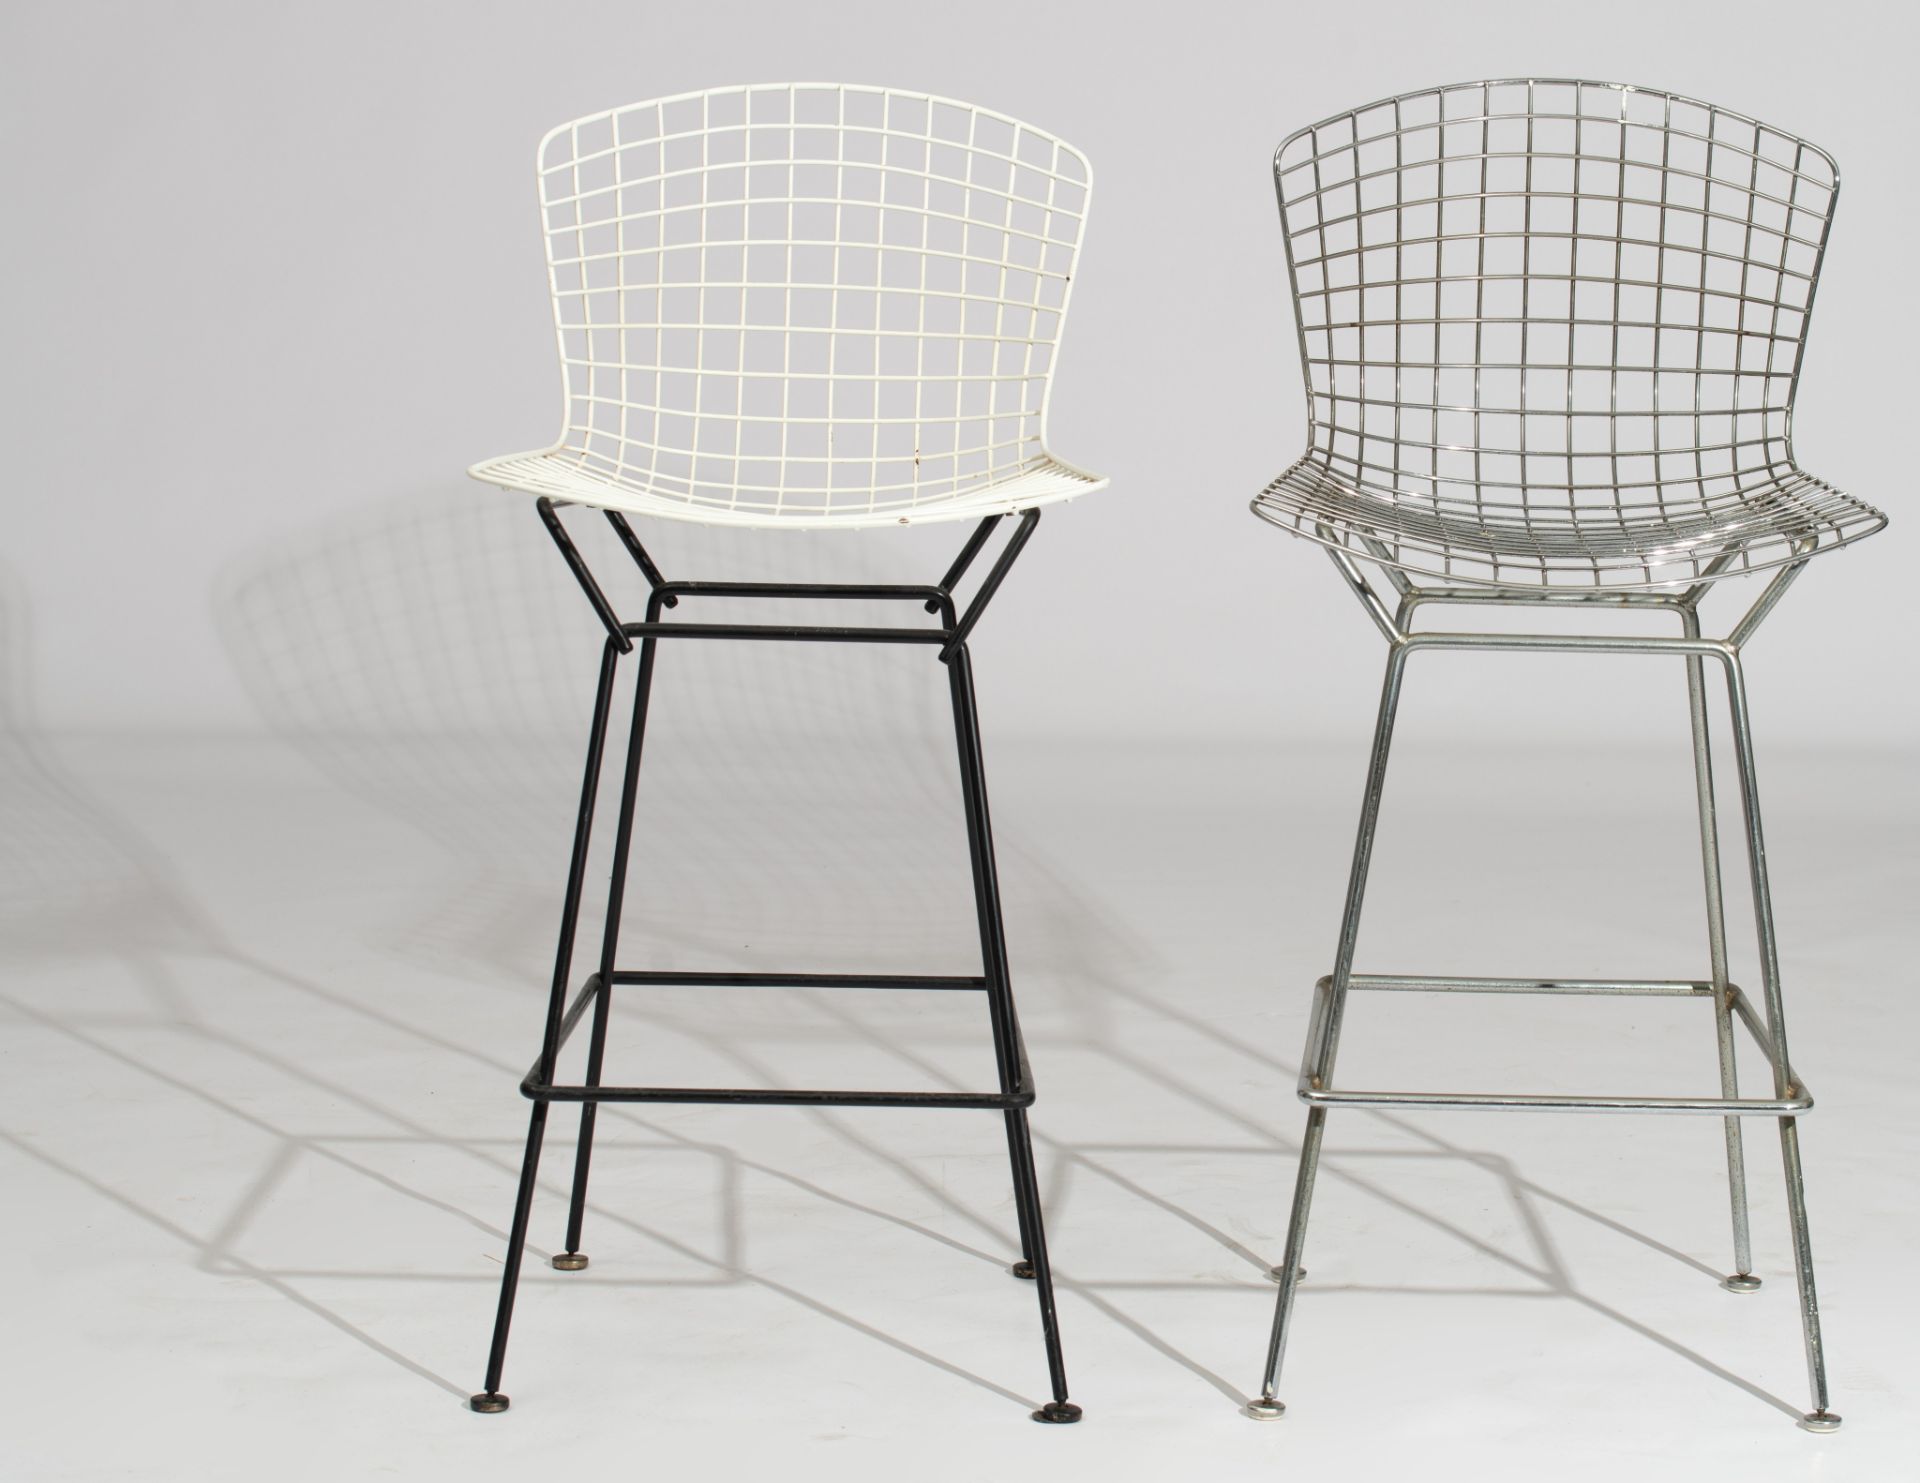 Two Bertoia barstools, designed by Harry Bertoia for Knoll International, H 107 - 109 - W 54 cm - Image 3 of 13